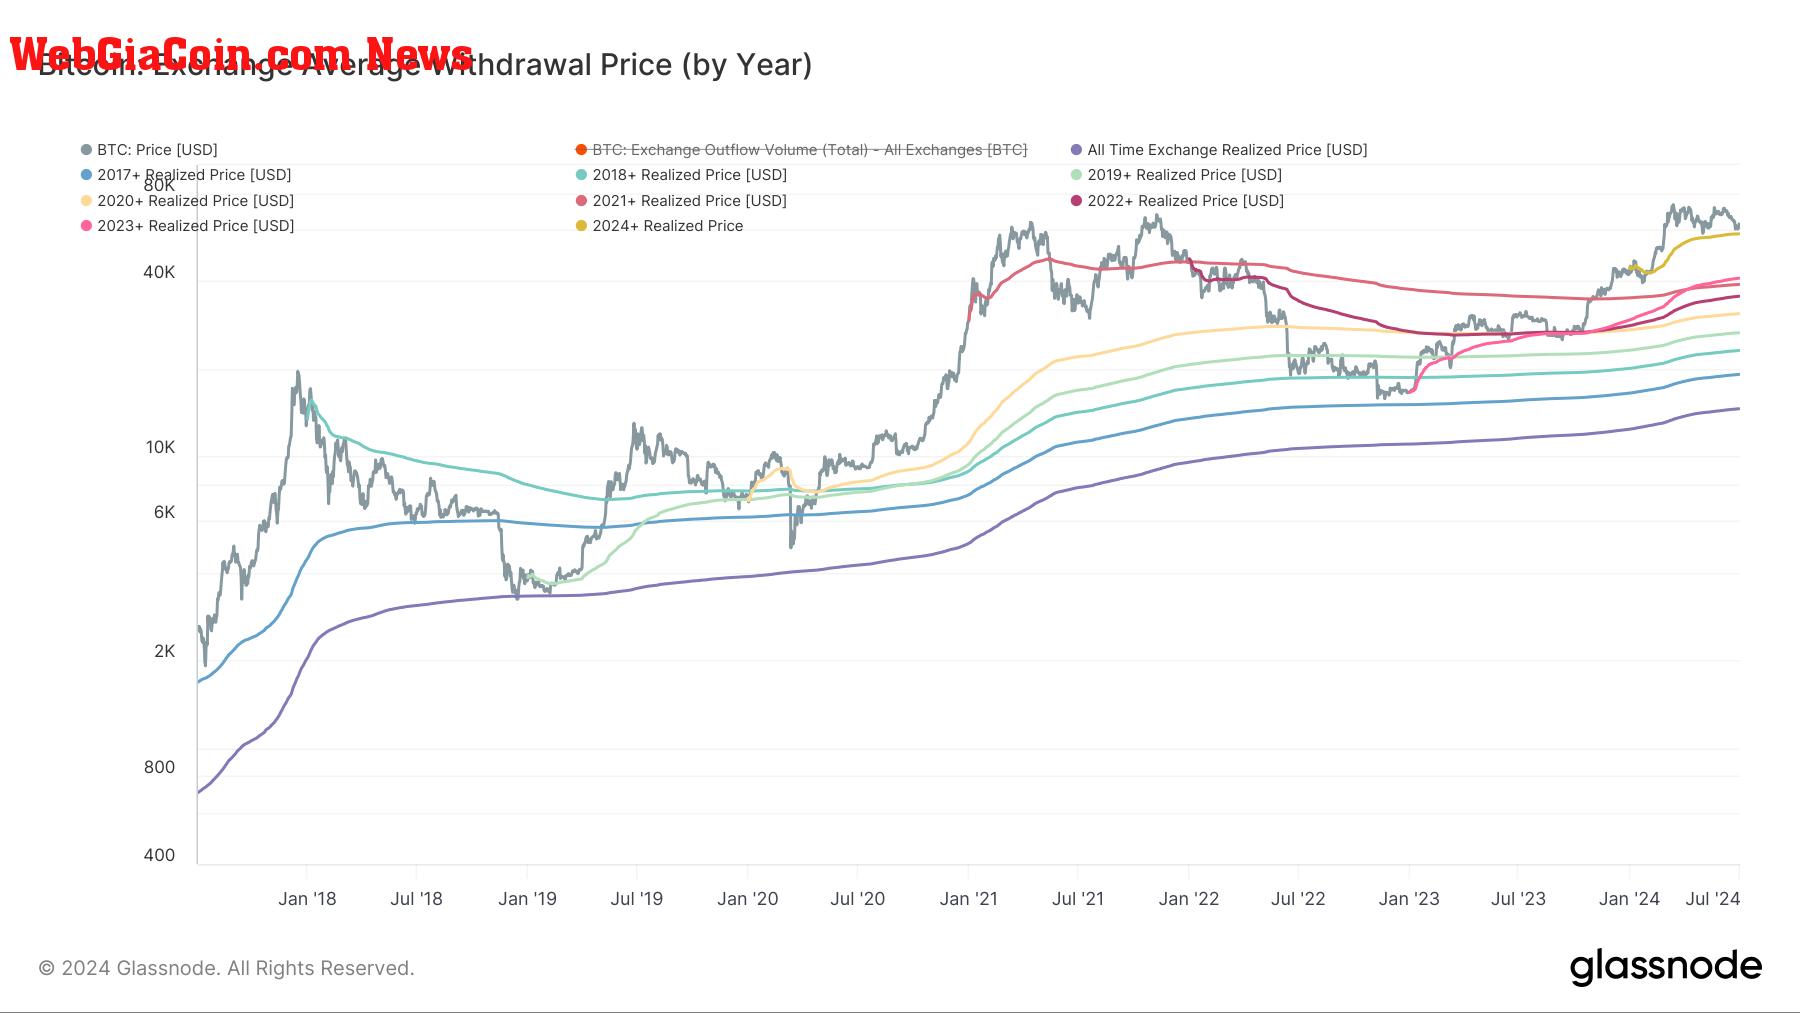 Bitcoin: Exchange Average Withdrawal Price (by year): (Source: Glassnode)